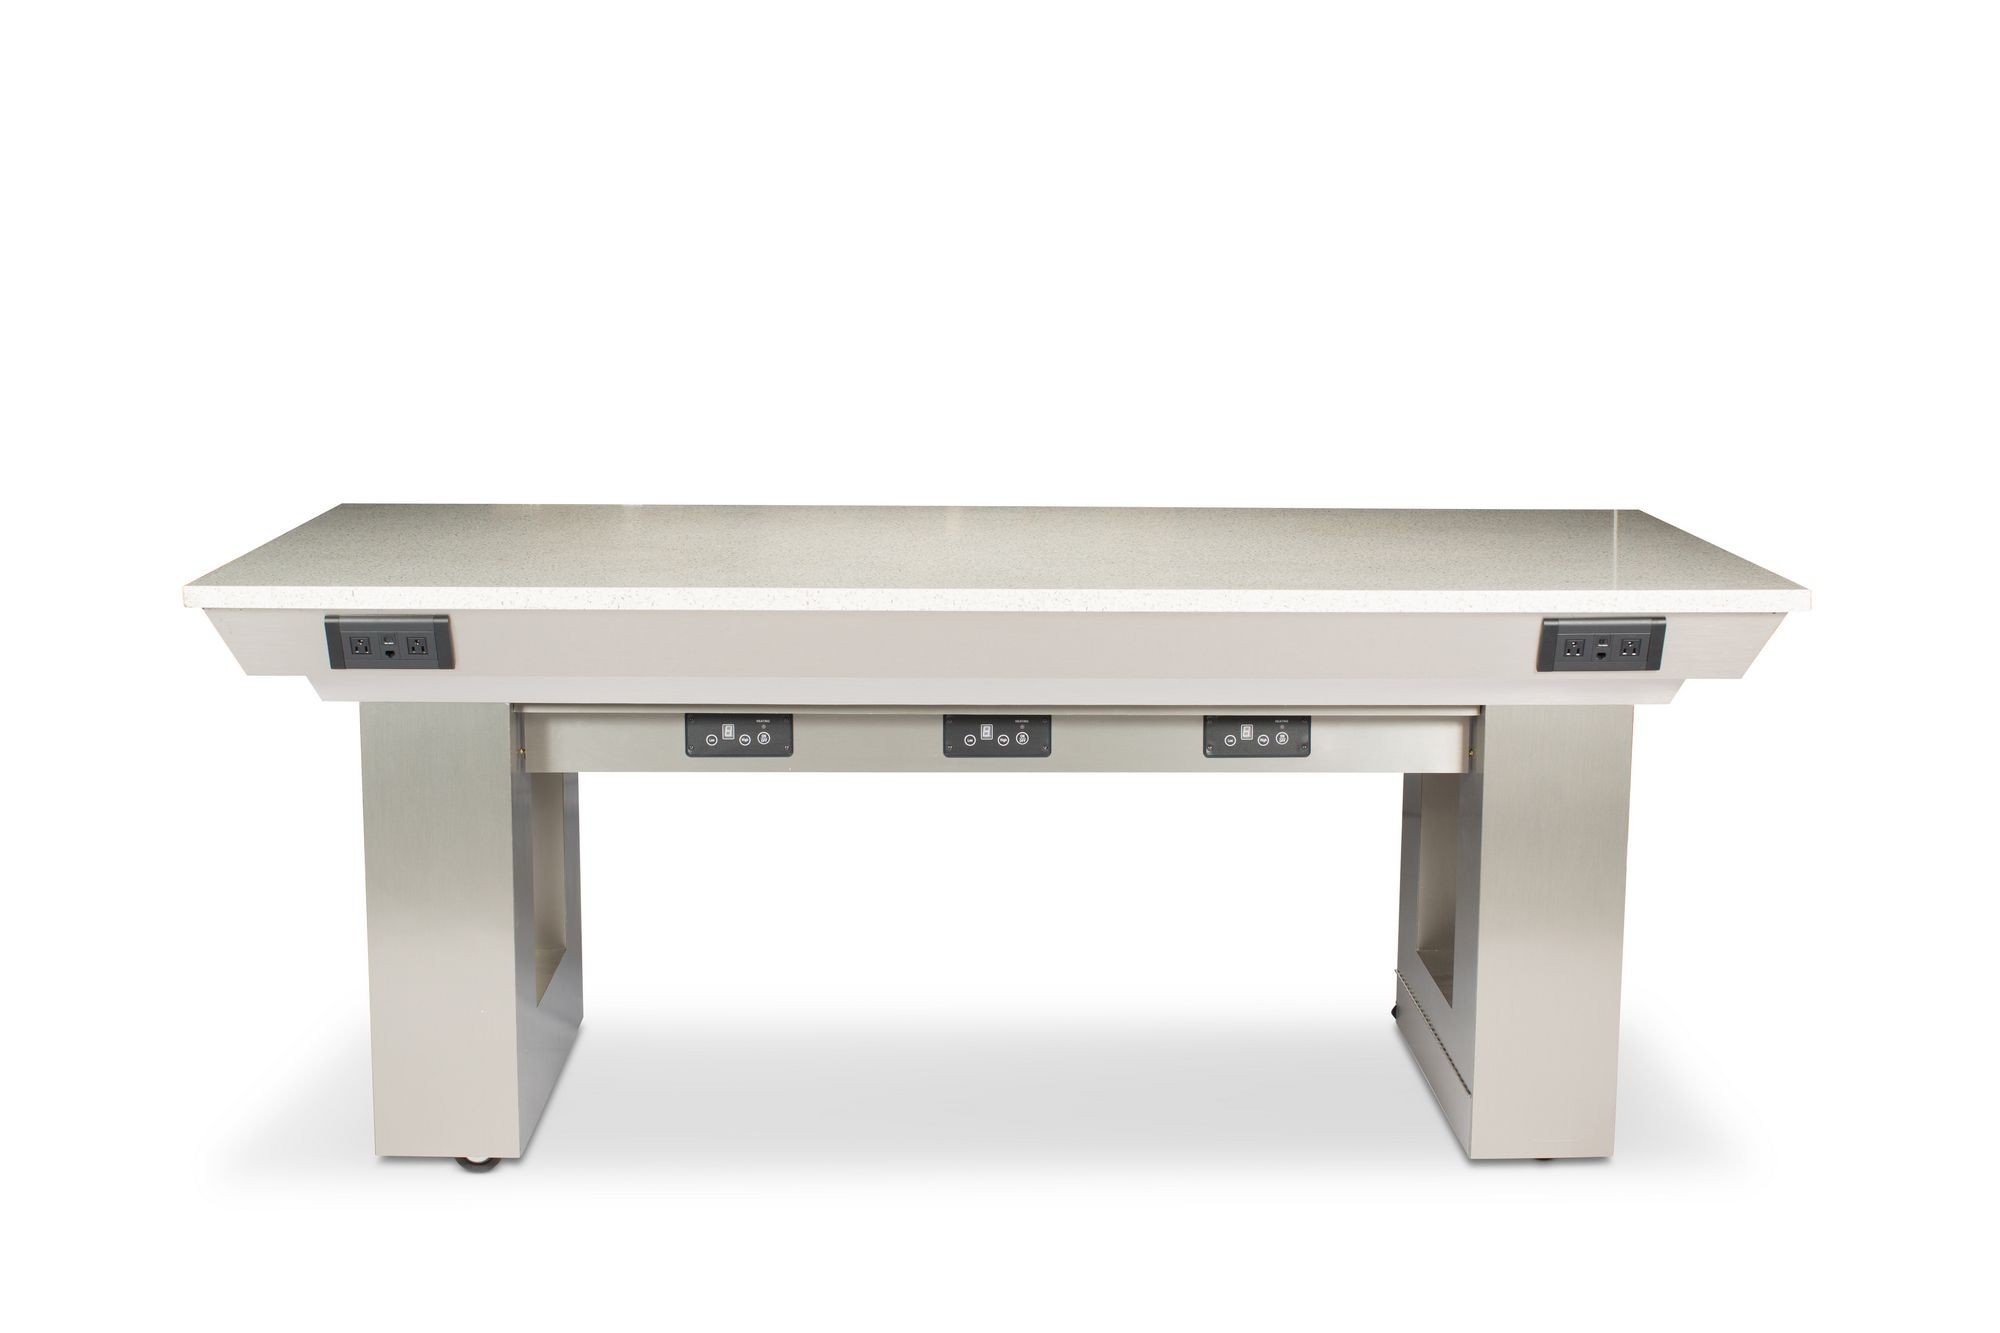 Bon Chef 50180 Mobile Communal Table with 6 Built In Warming Stoves